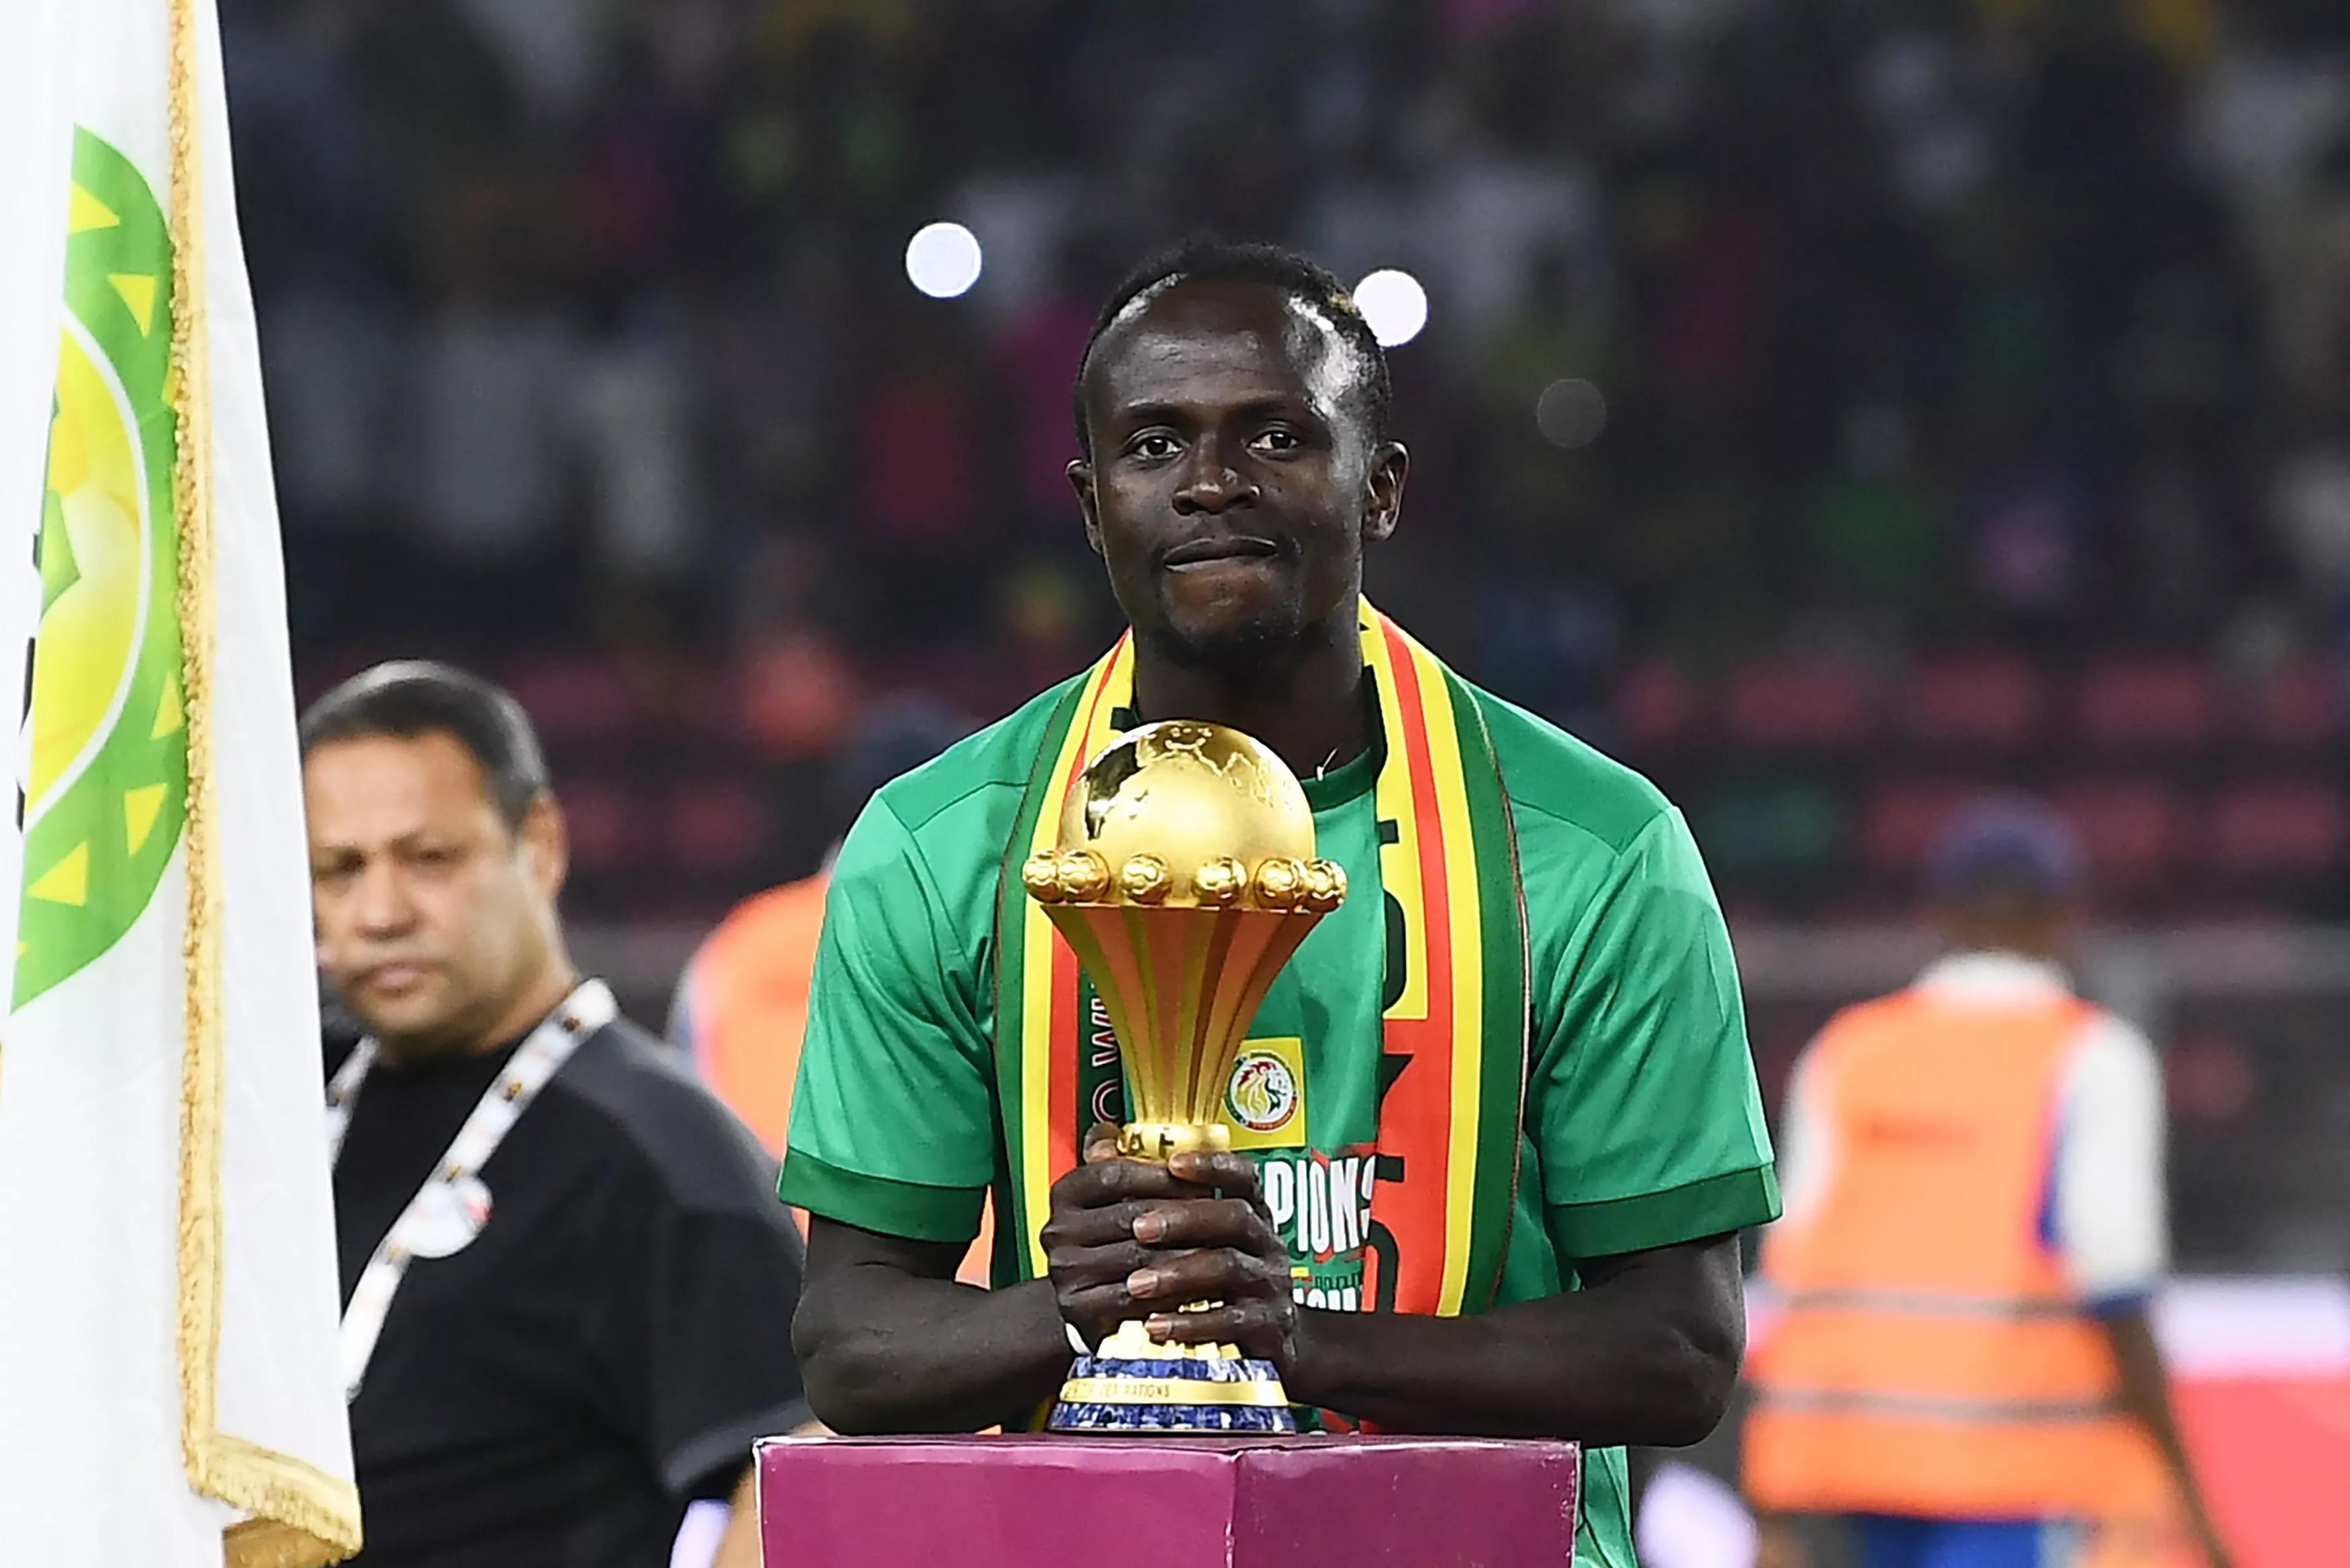 Sadio Mane: Senegal's reserved superstar making a difference on and off the pitch